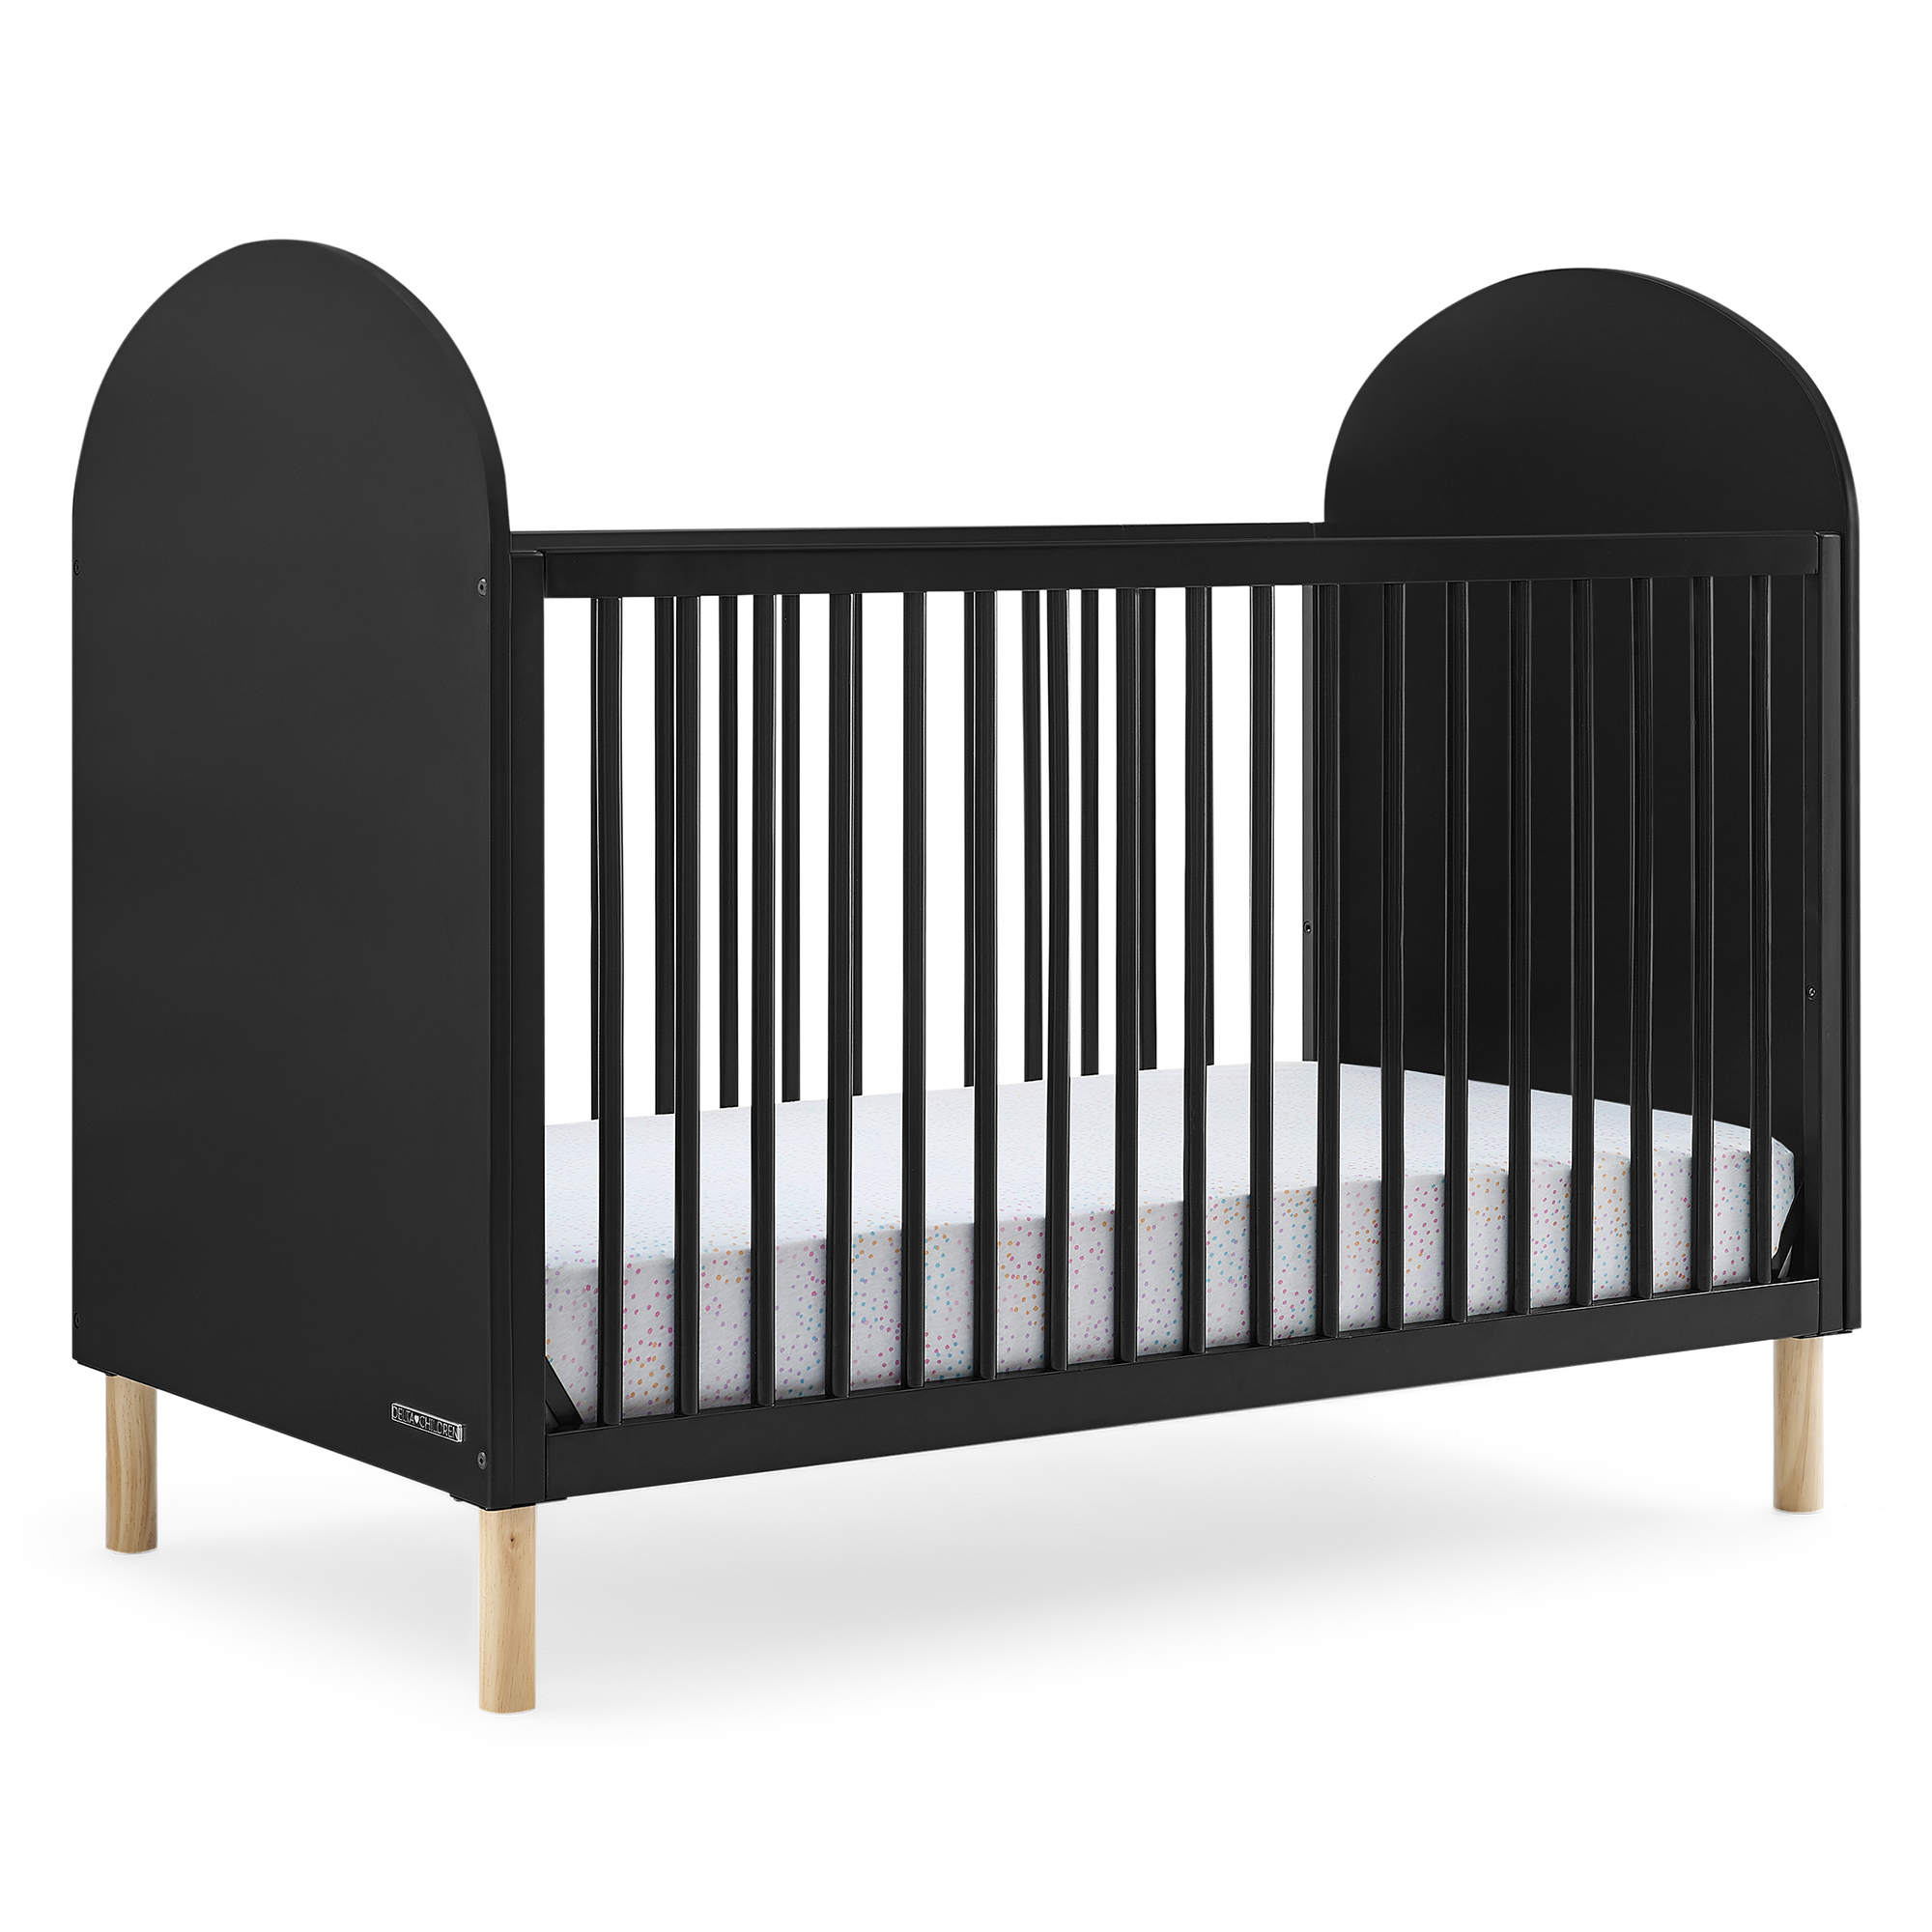 Delta Children Reese 4-in-1 Convertible Crib - Greenguard Gold Certified, Ebony/Natural - image 1 of 17